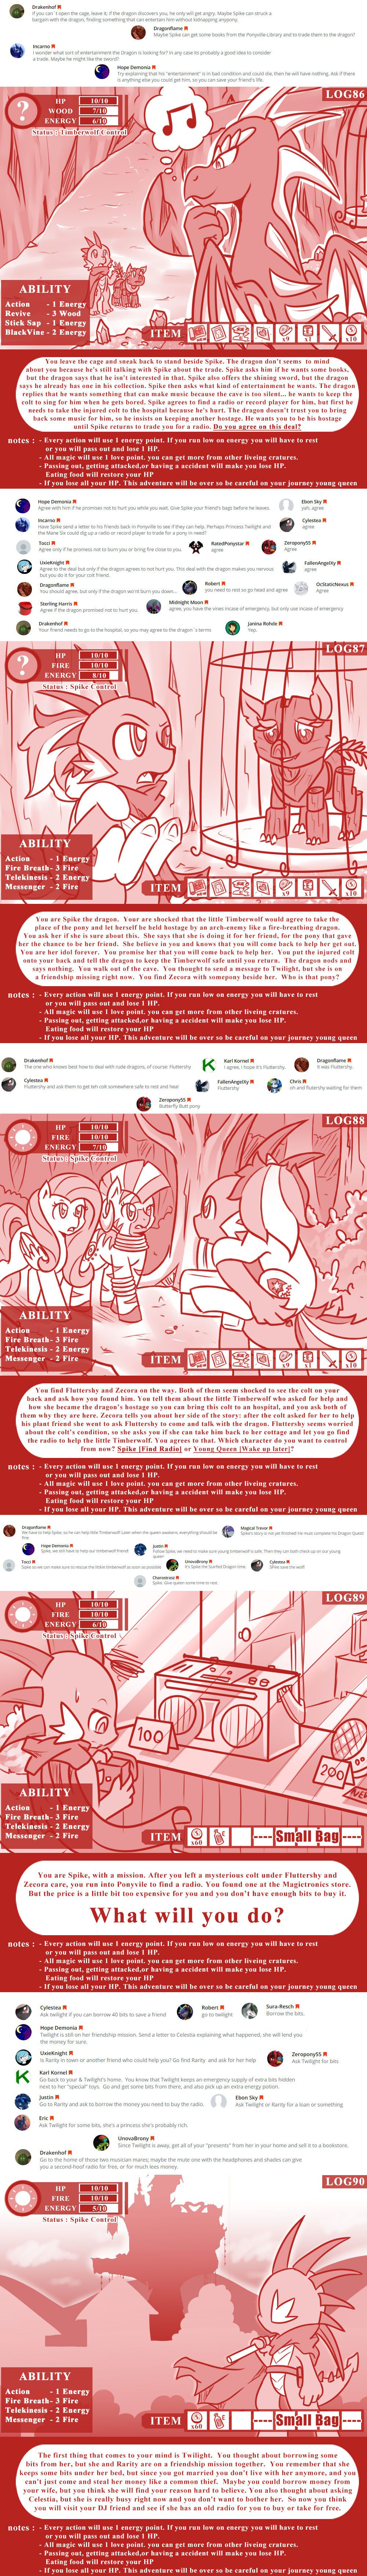 [Vavacung] The Adventure Logs Of Young Queen (My Little Pony: Friendship is Magic) [English] [Ongoing] 19